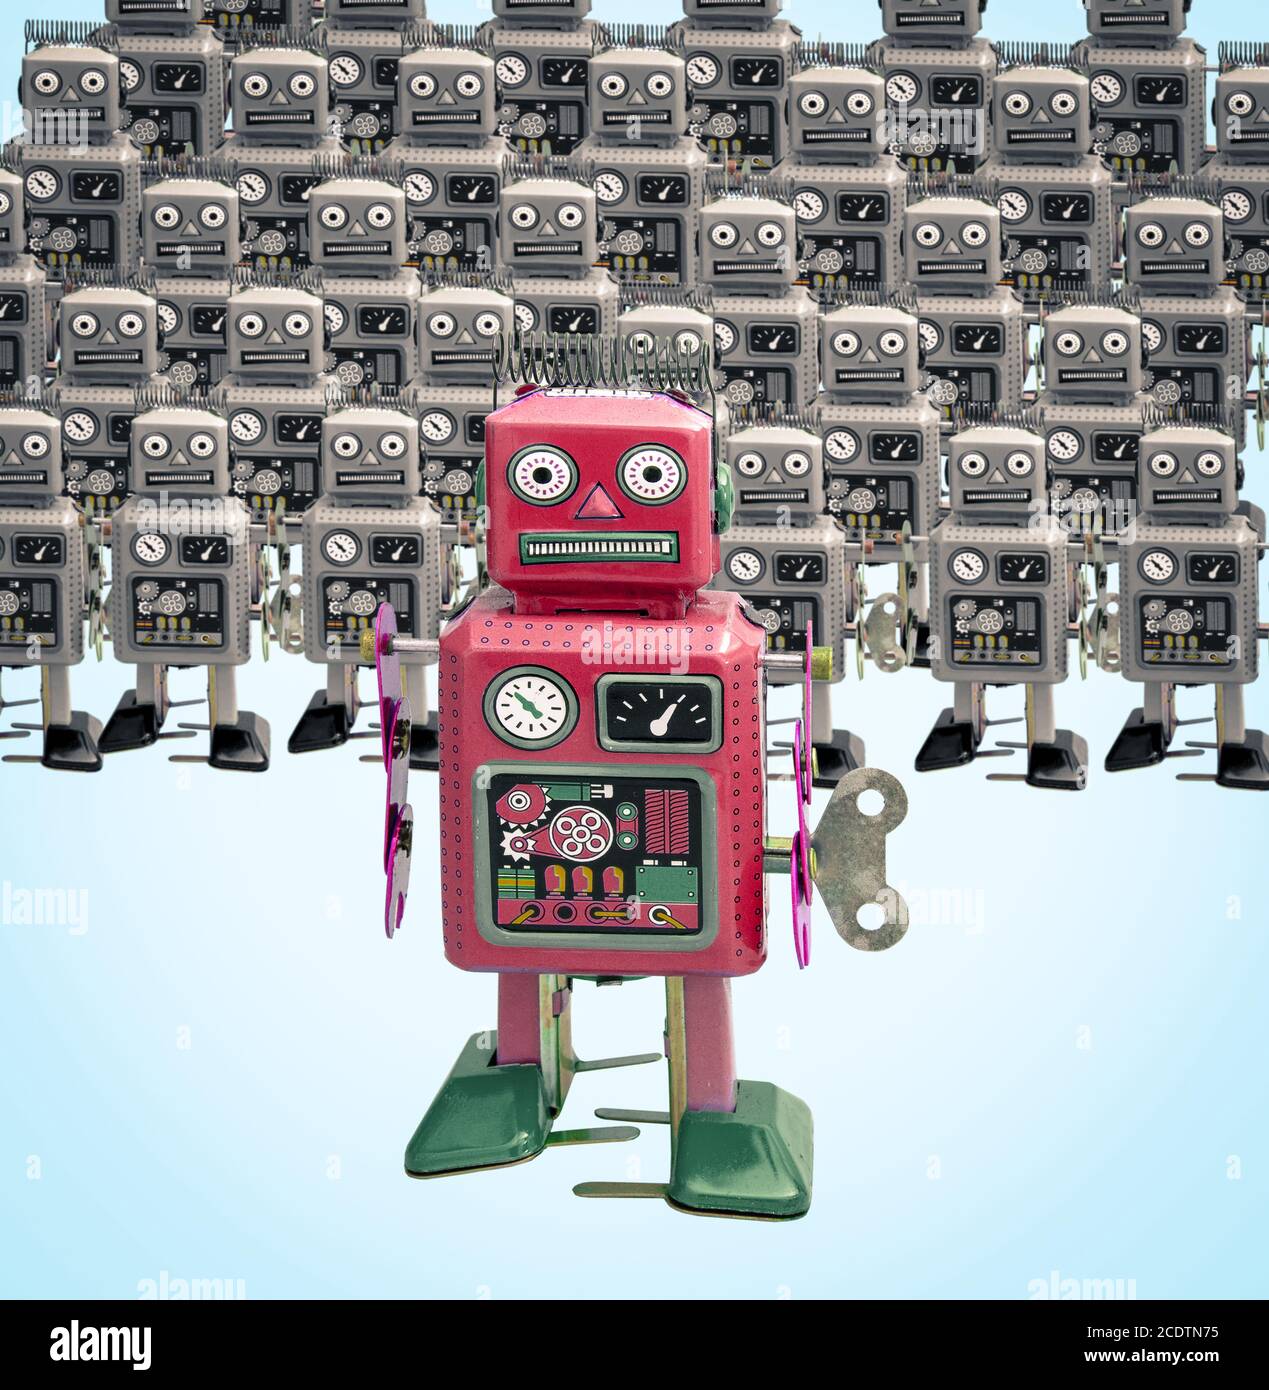 Red Robot High Resolution Stock Photography and Images - Alamy